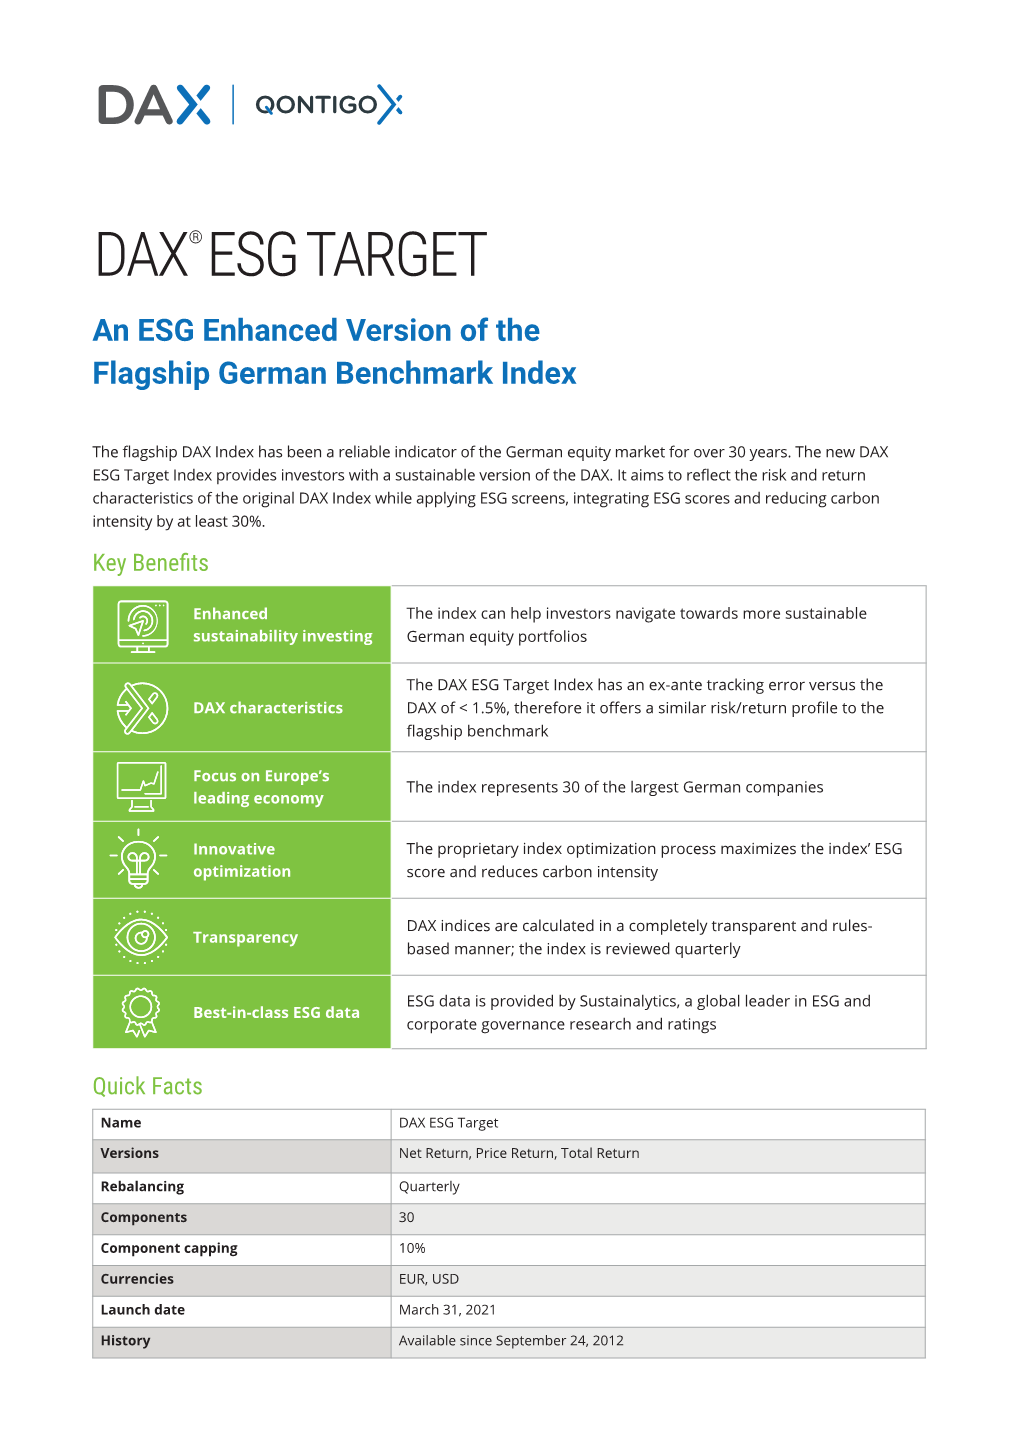 DAX ESG Target Index Provides Investors with a Sustainable Version of the DAX